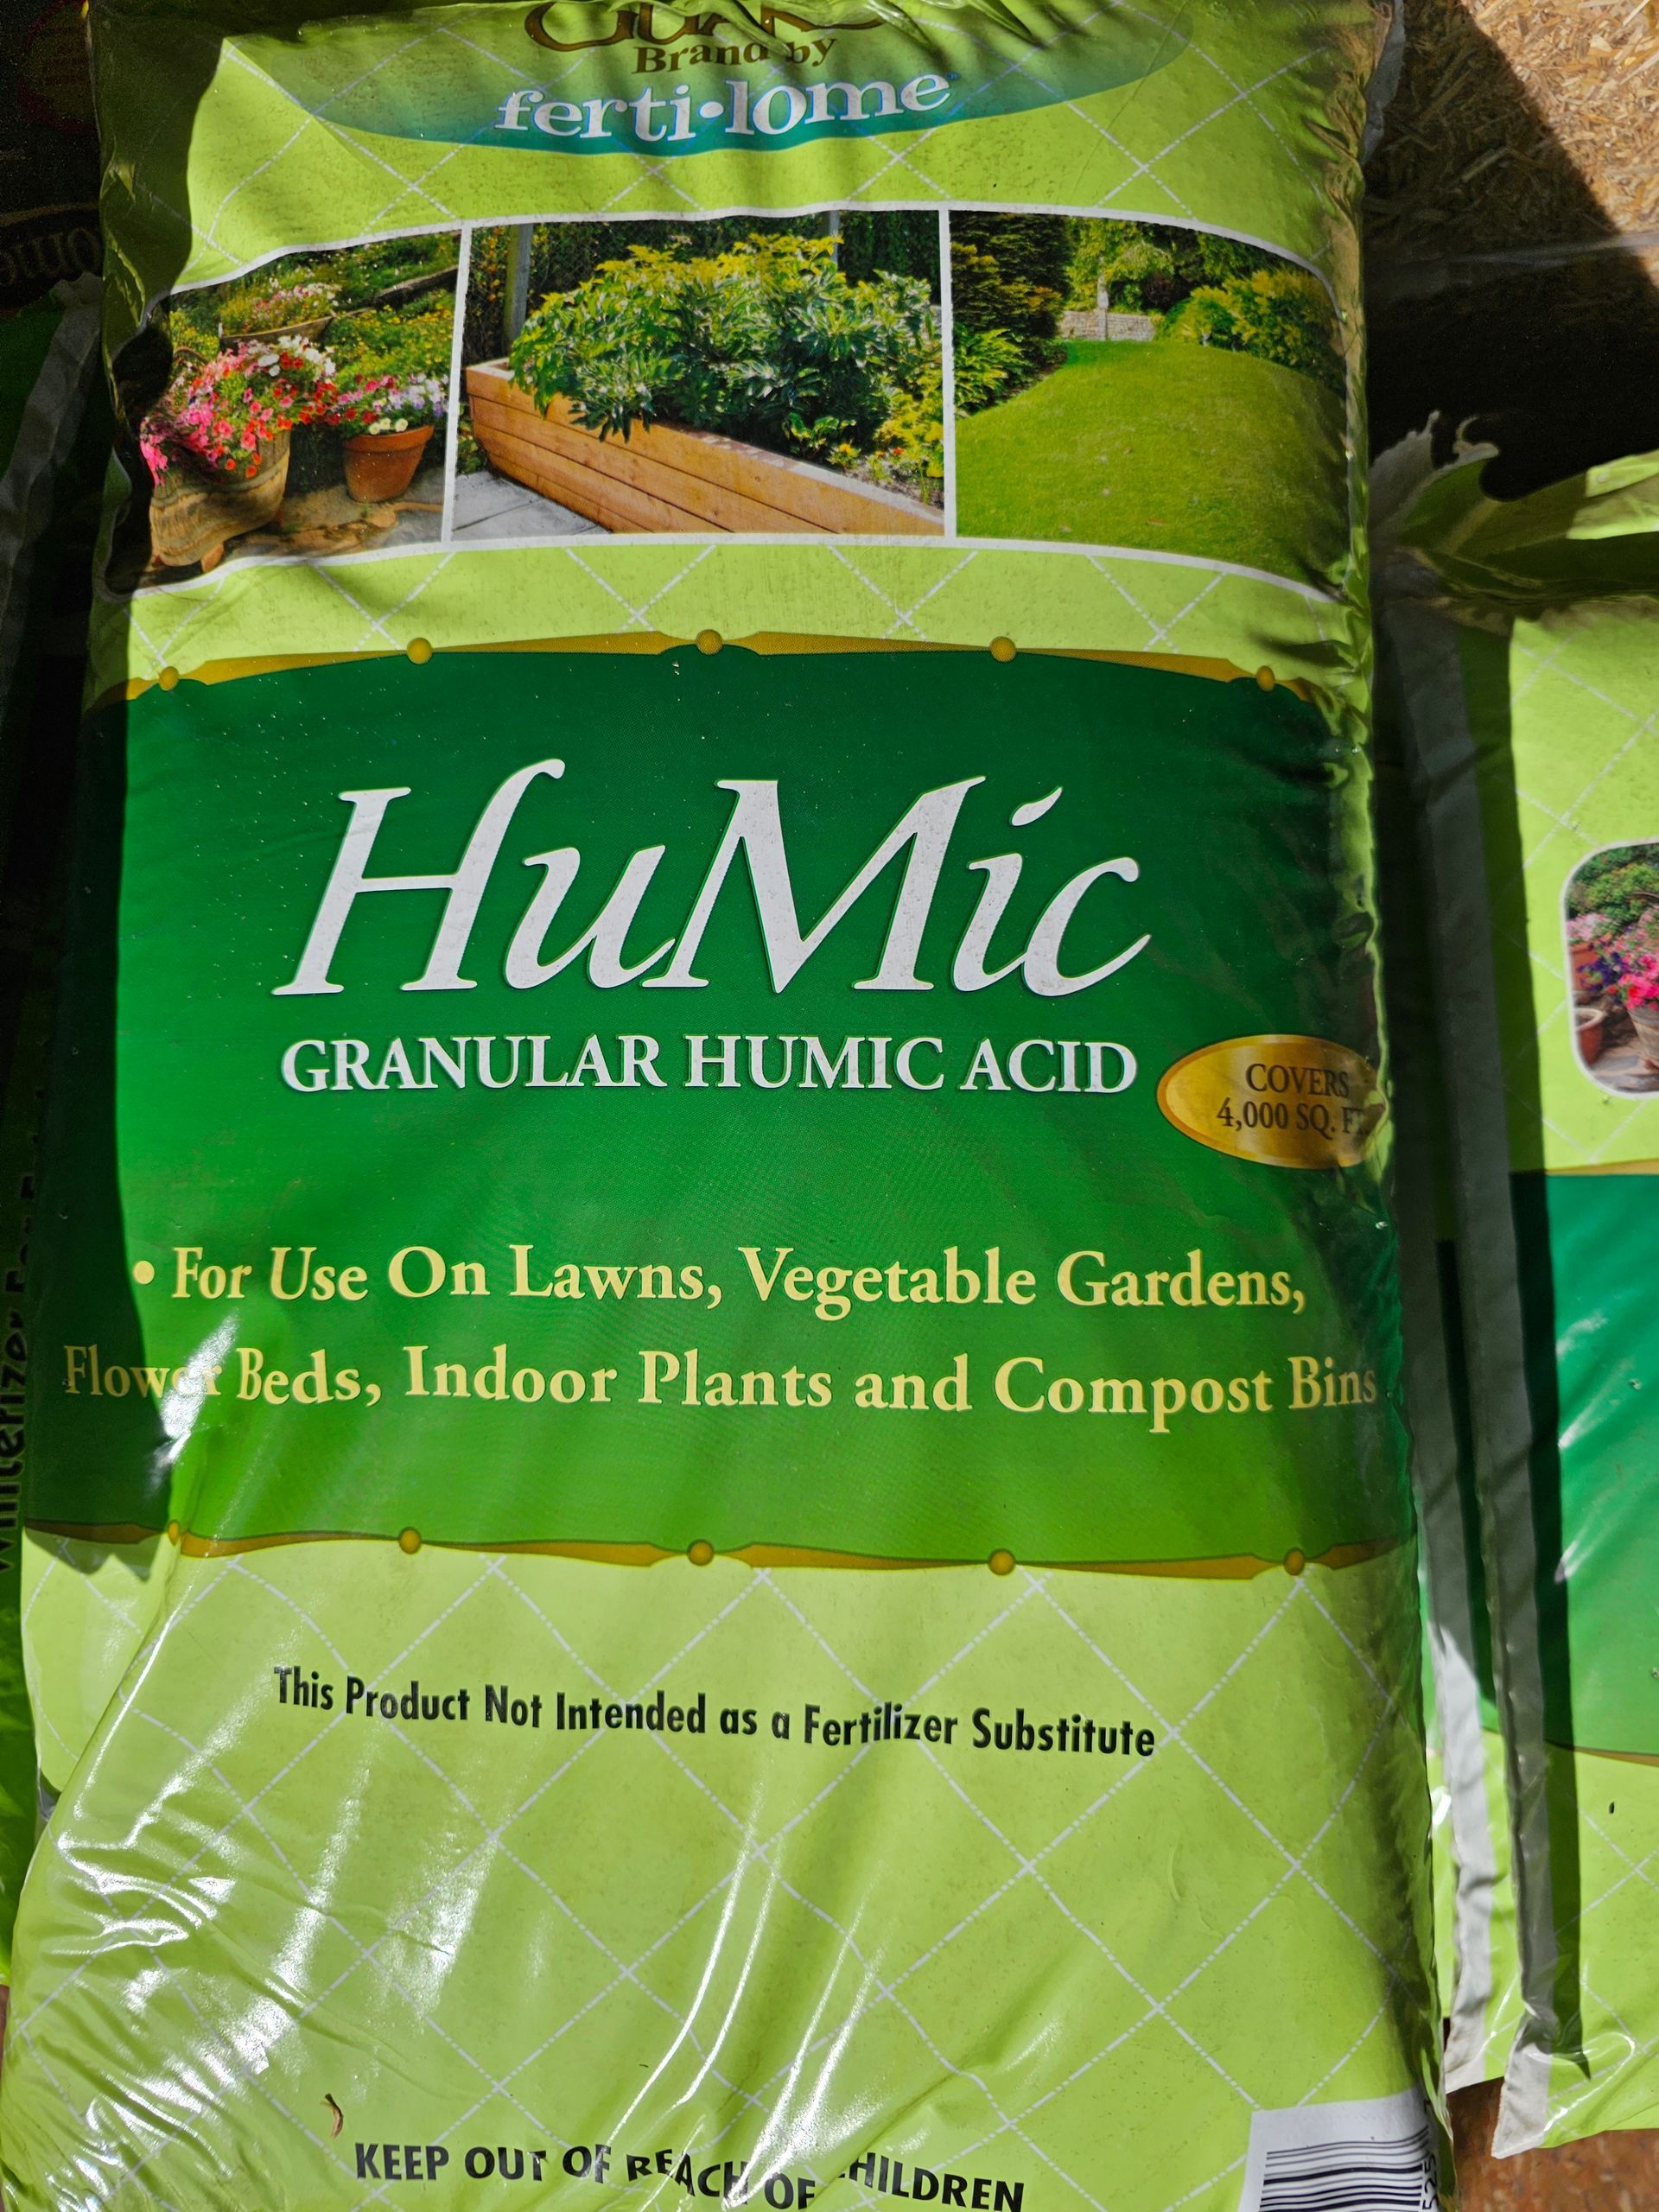 Granular Humic Acid for Lawns. Breaks down organic matter and returns it to the soil